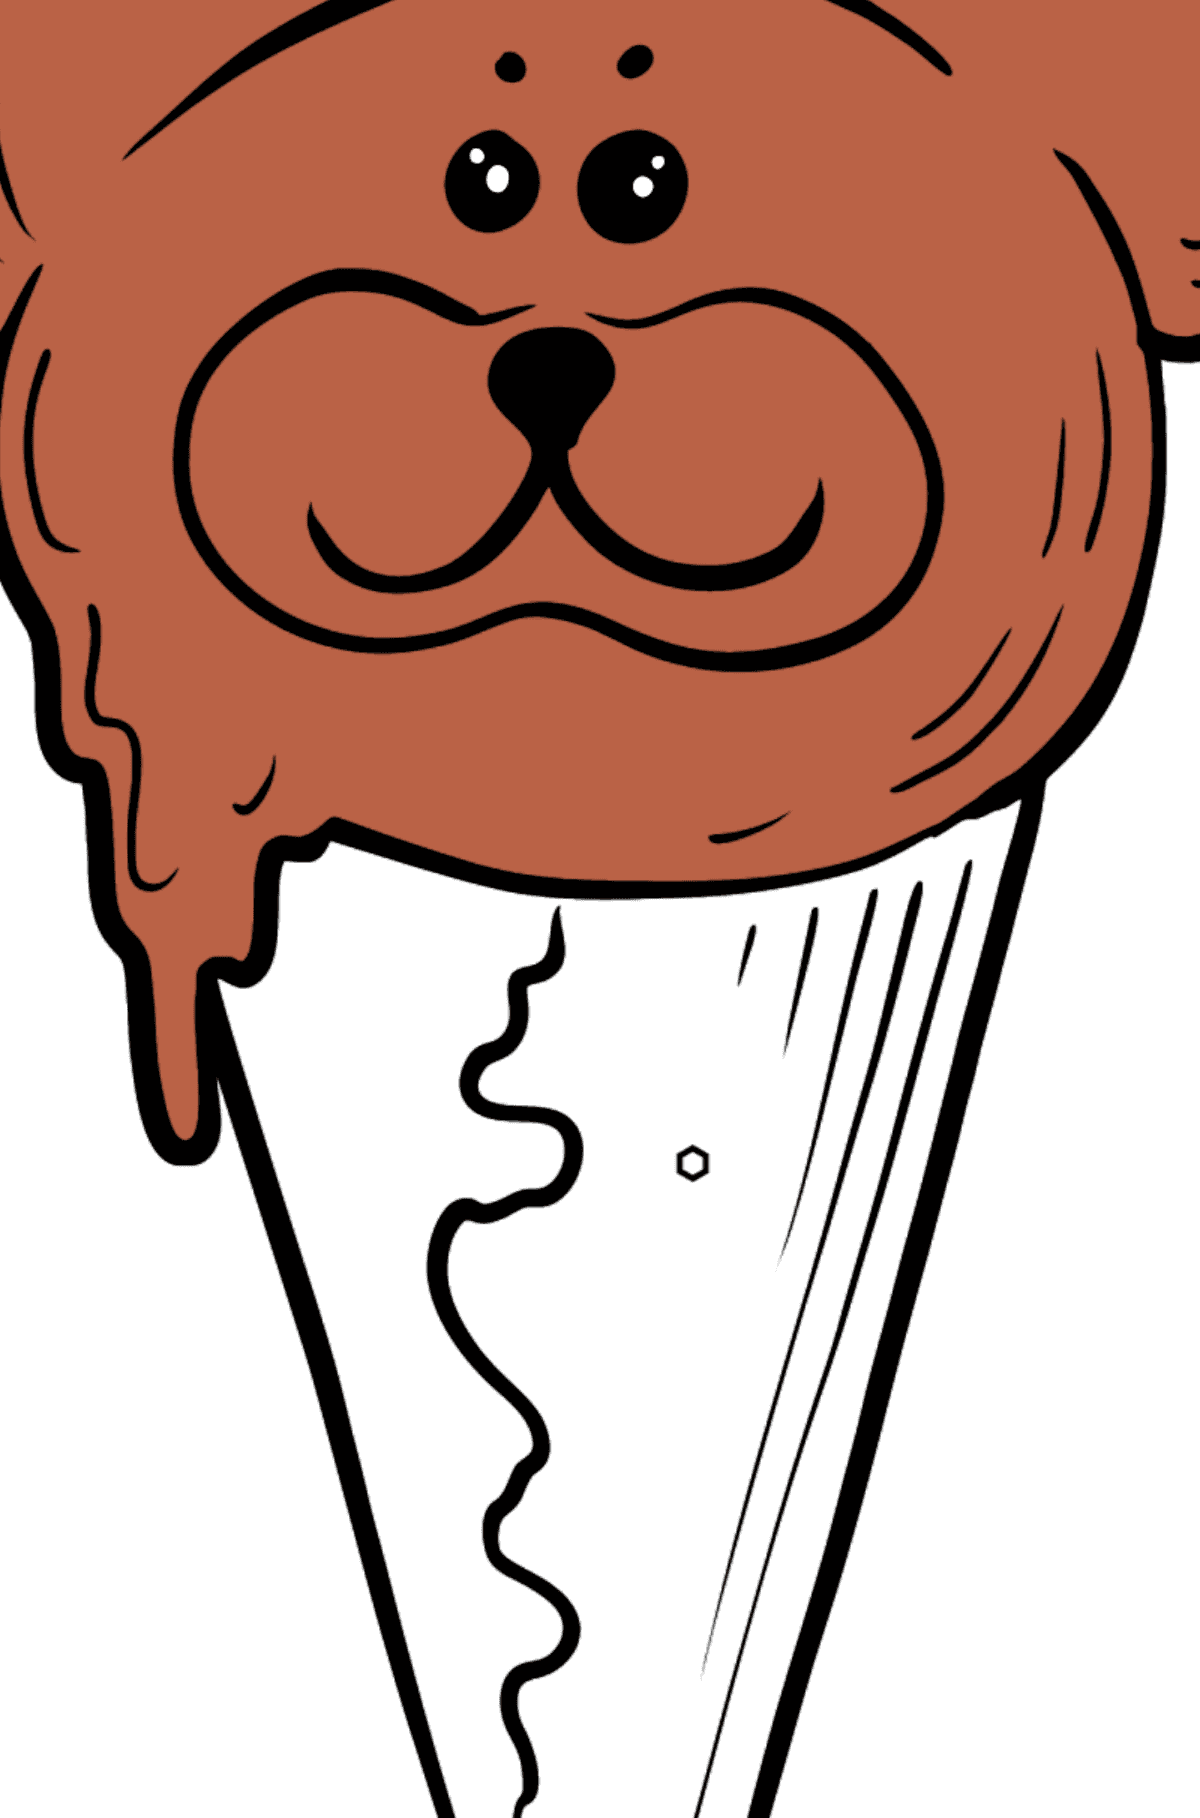 Ice Cream - Chocolate Bear with Eyes coloring page - Coloring by Geometric Shapes for Kids